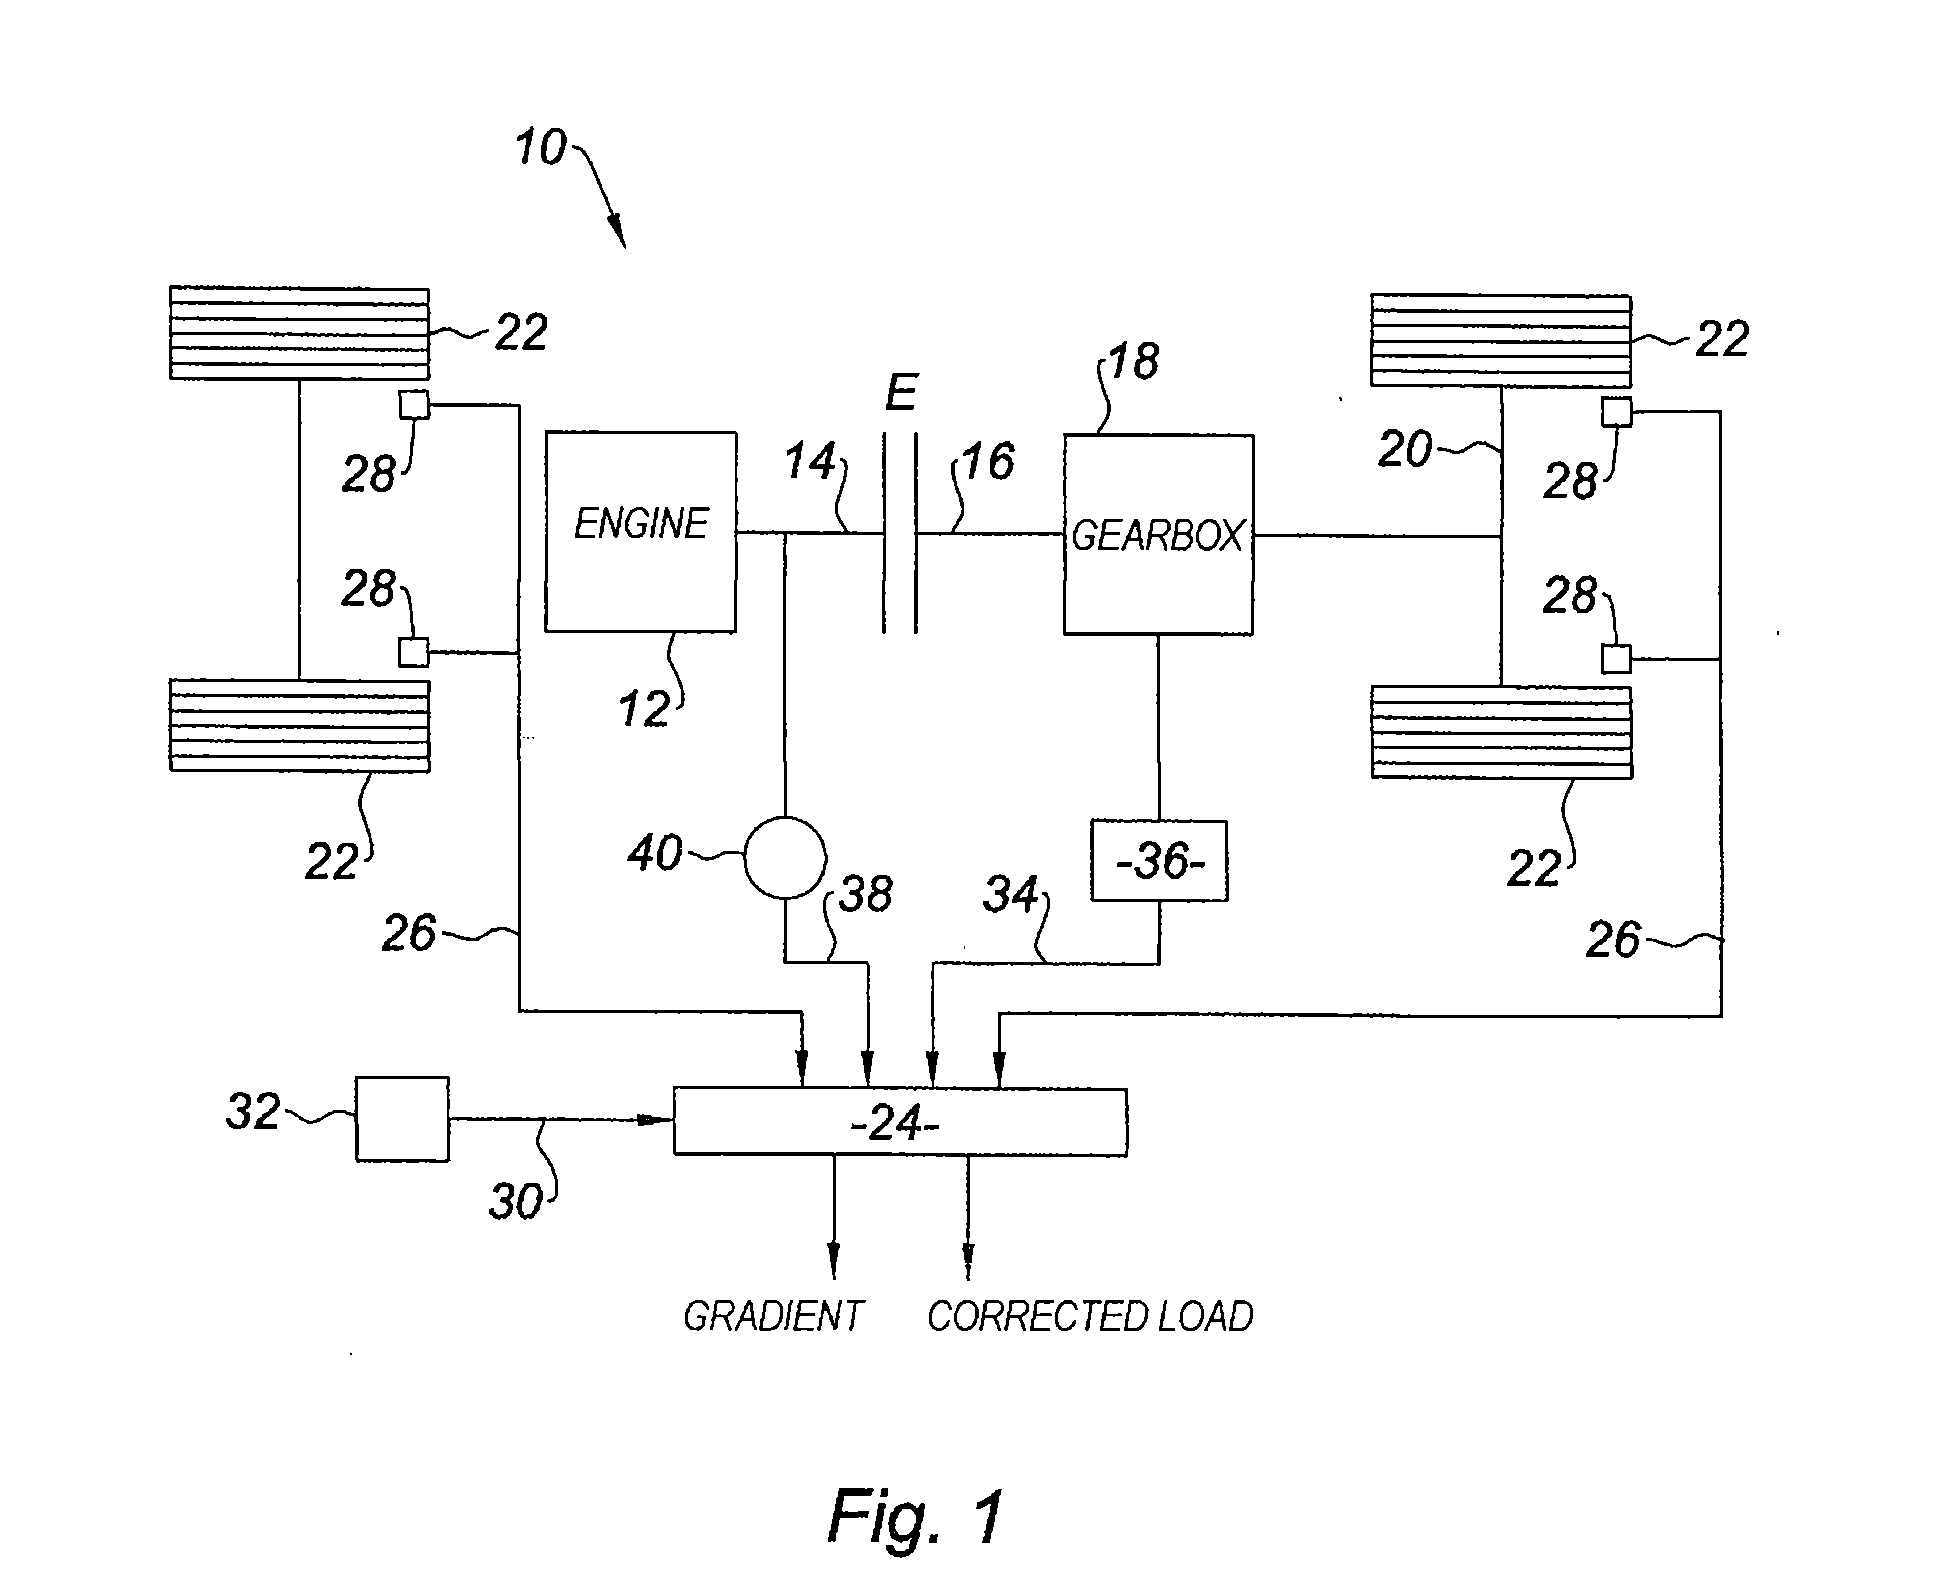 Method of controlling the path of a vehicle